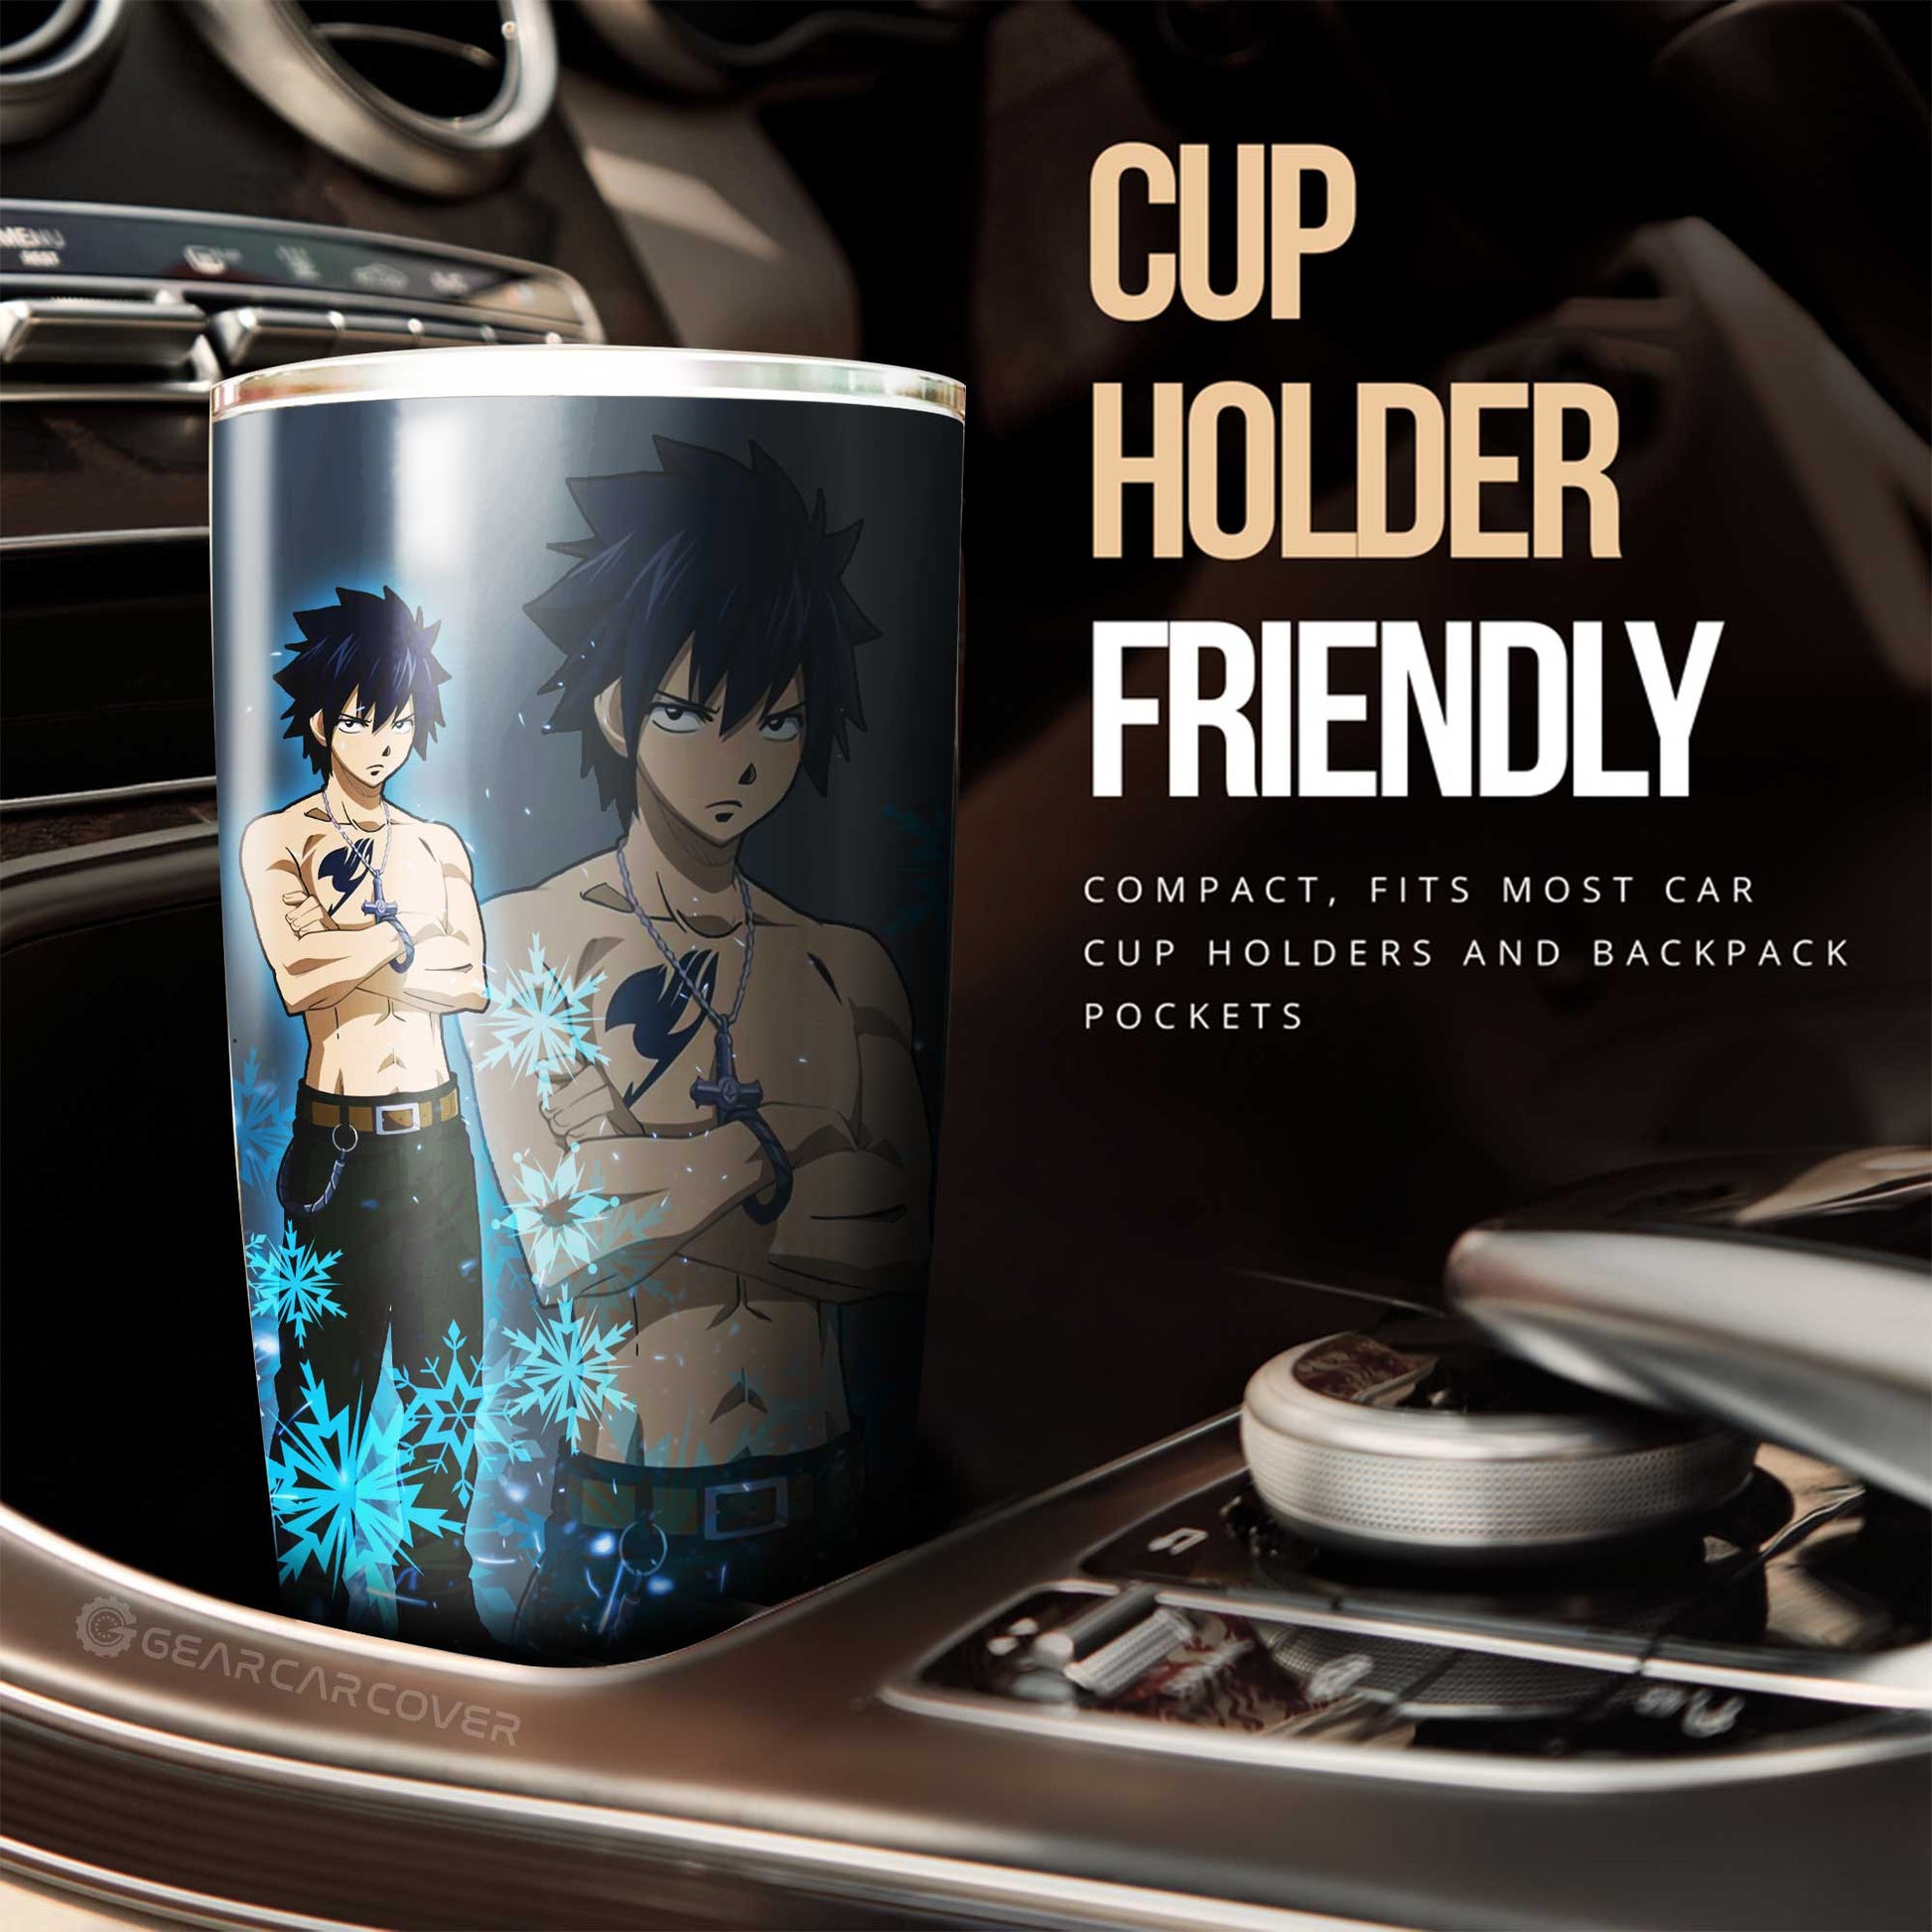 Gray Fullbuster Tumbler Cup Custom Fairy Tail Anime Car Accessories - Gearcarcover - 2